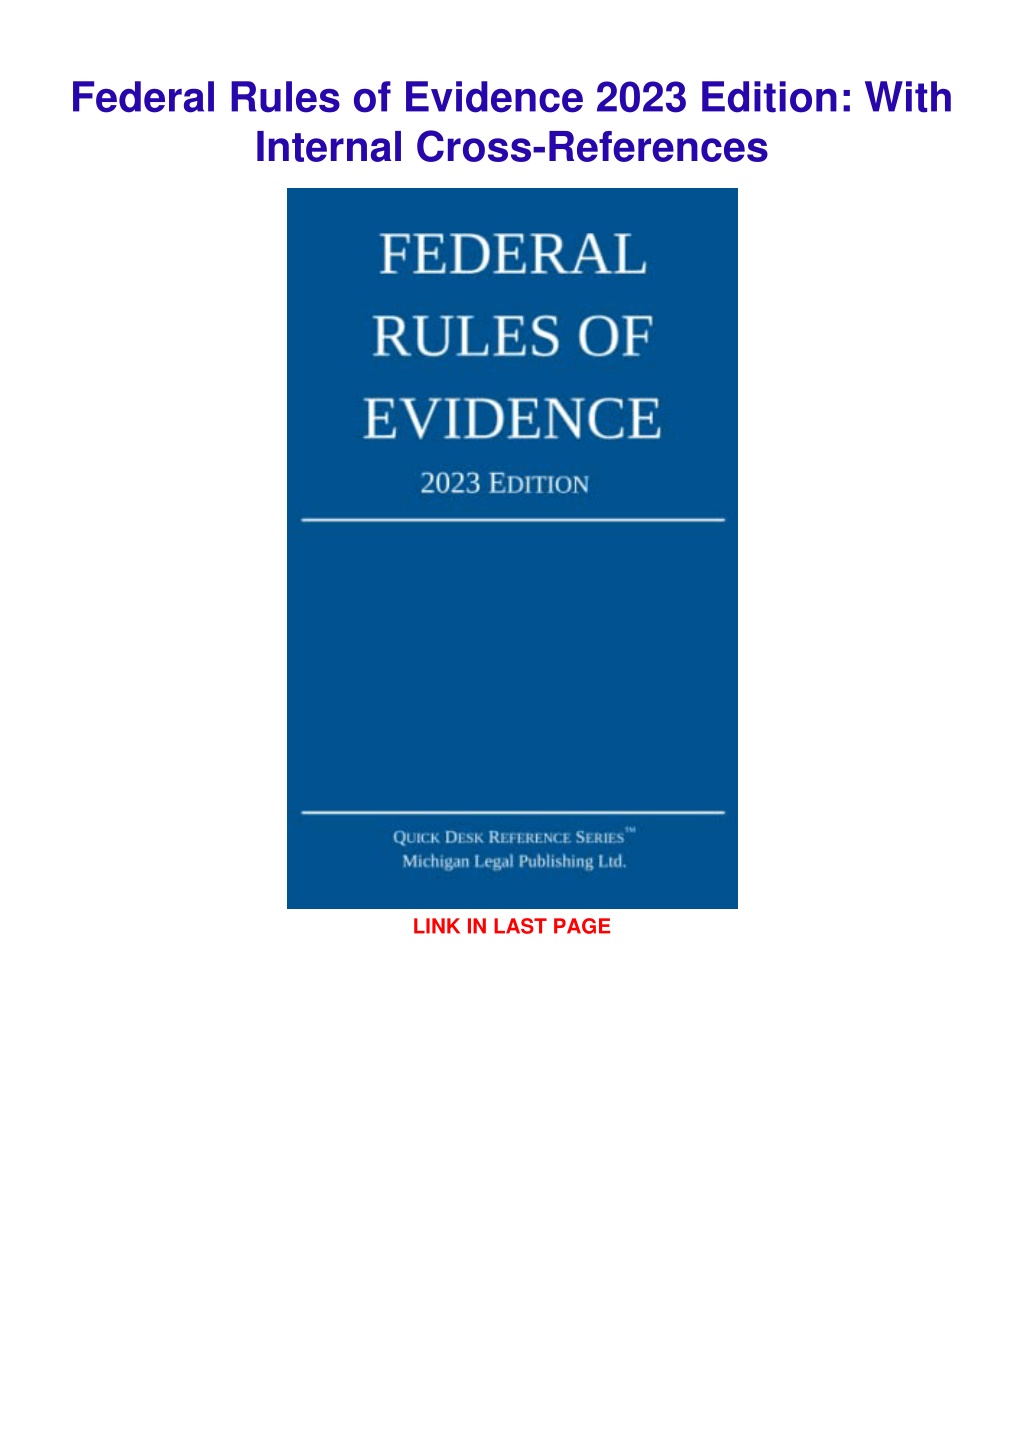 PPT Download Book [PDF] Federal Rules of Evidence 2023 Edition With